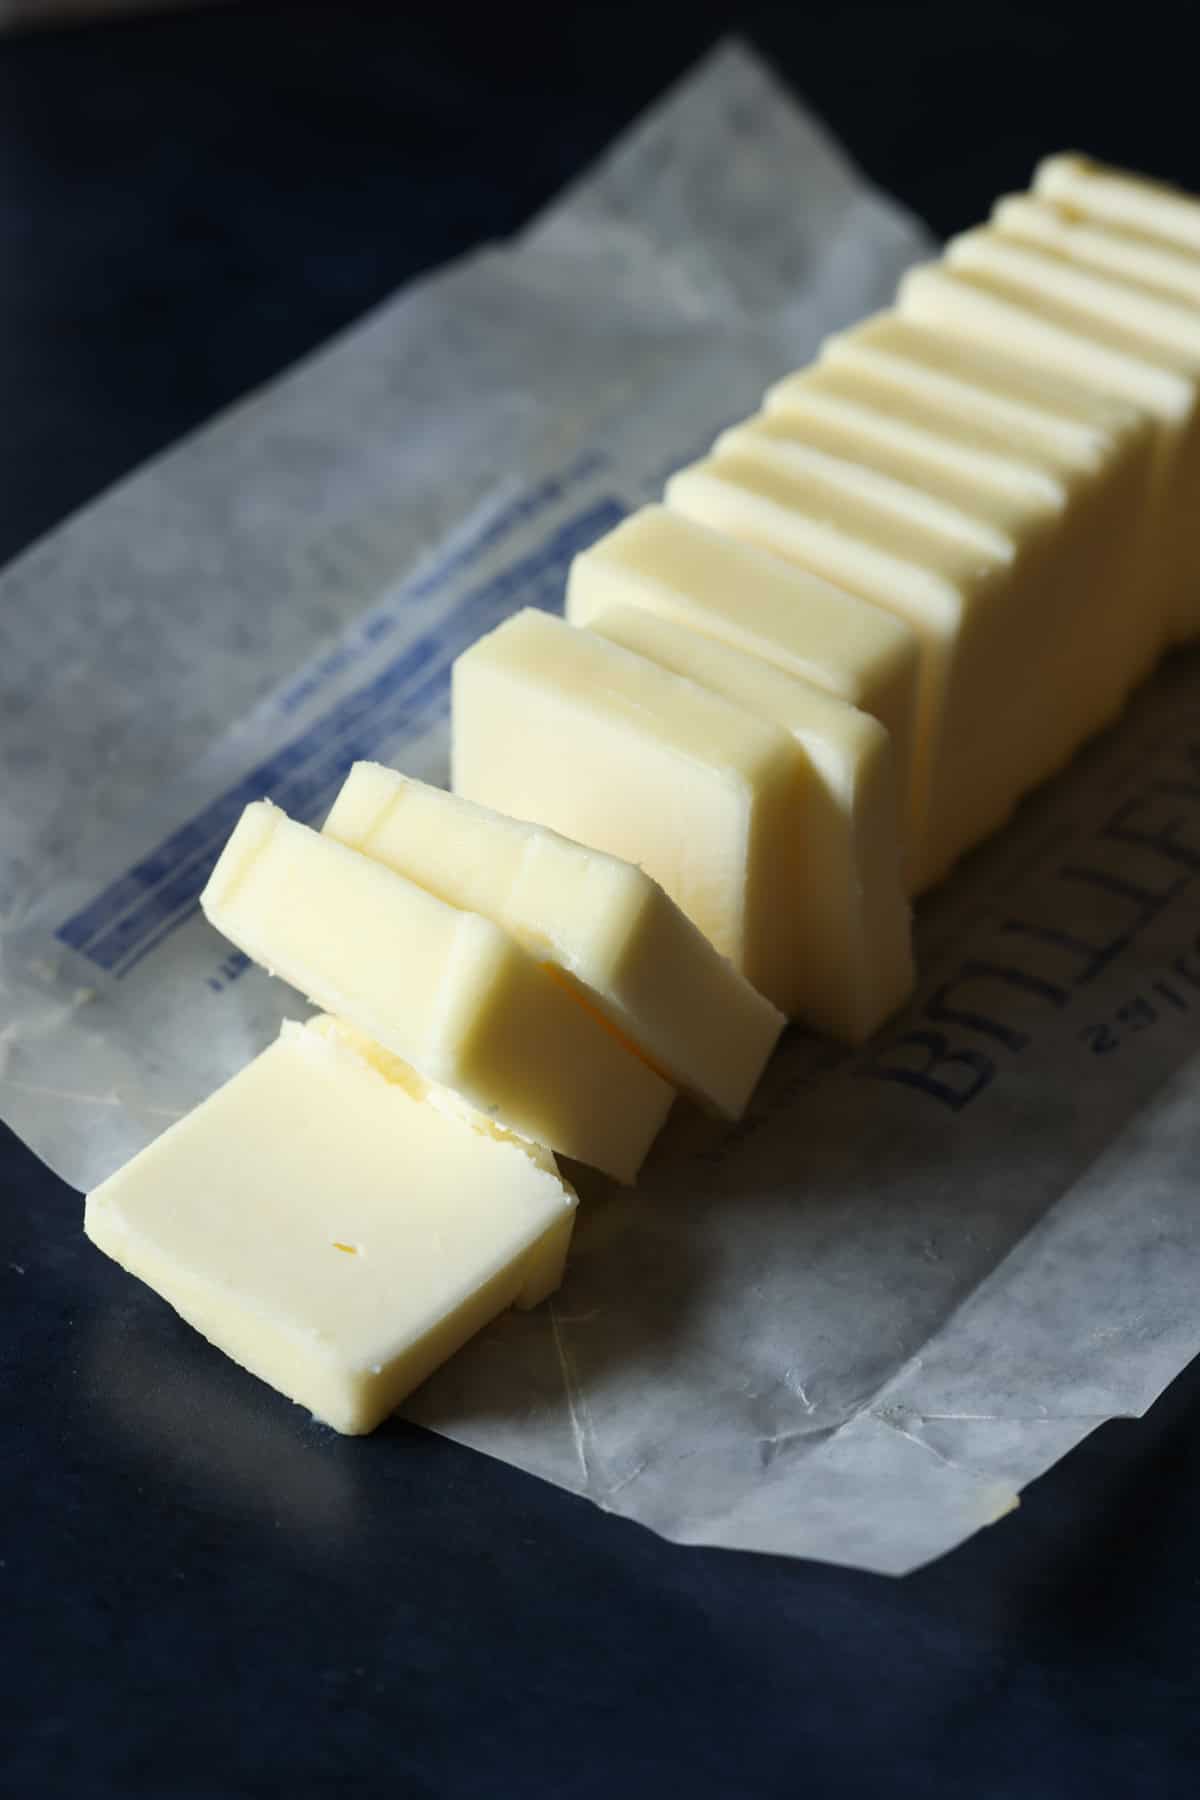 A stick of butter but into slices on the butter wrapper.